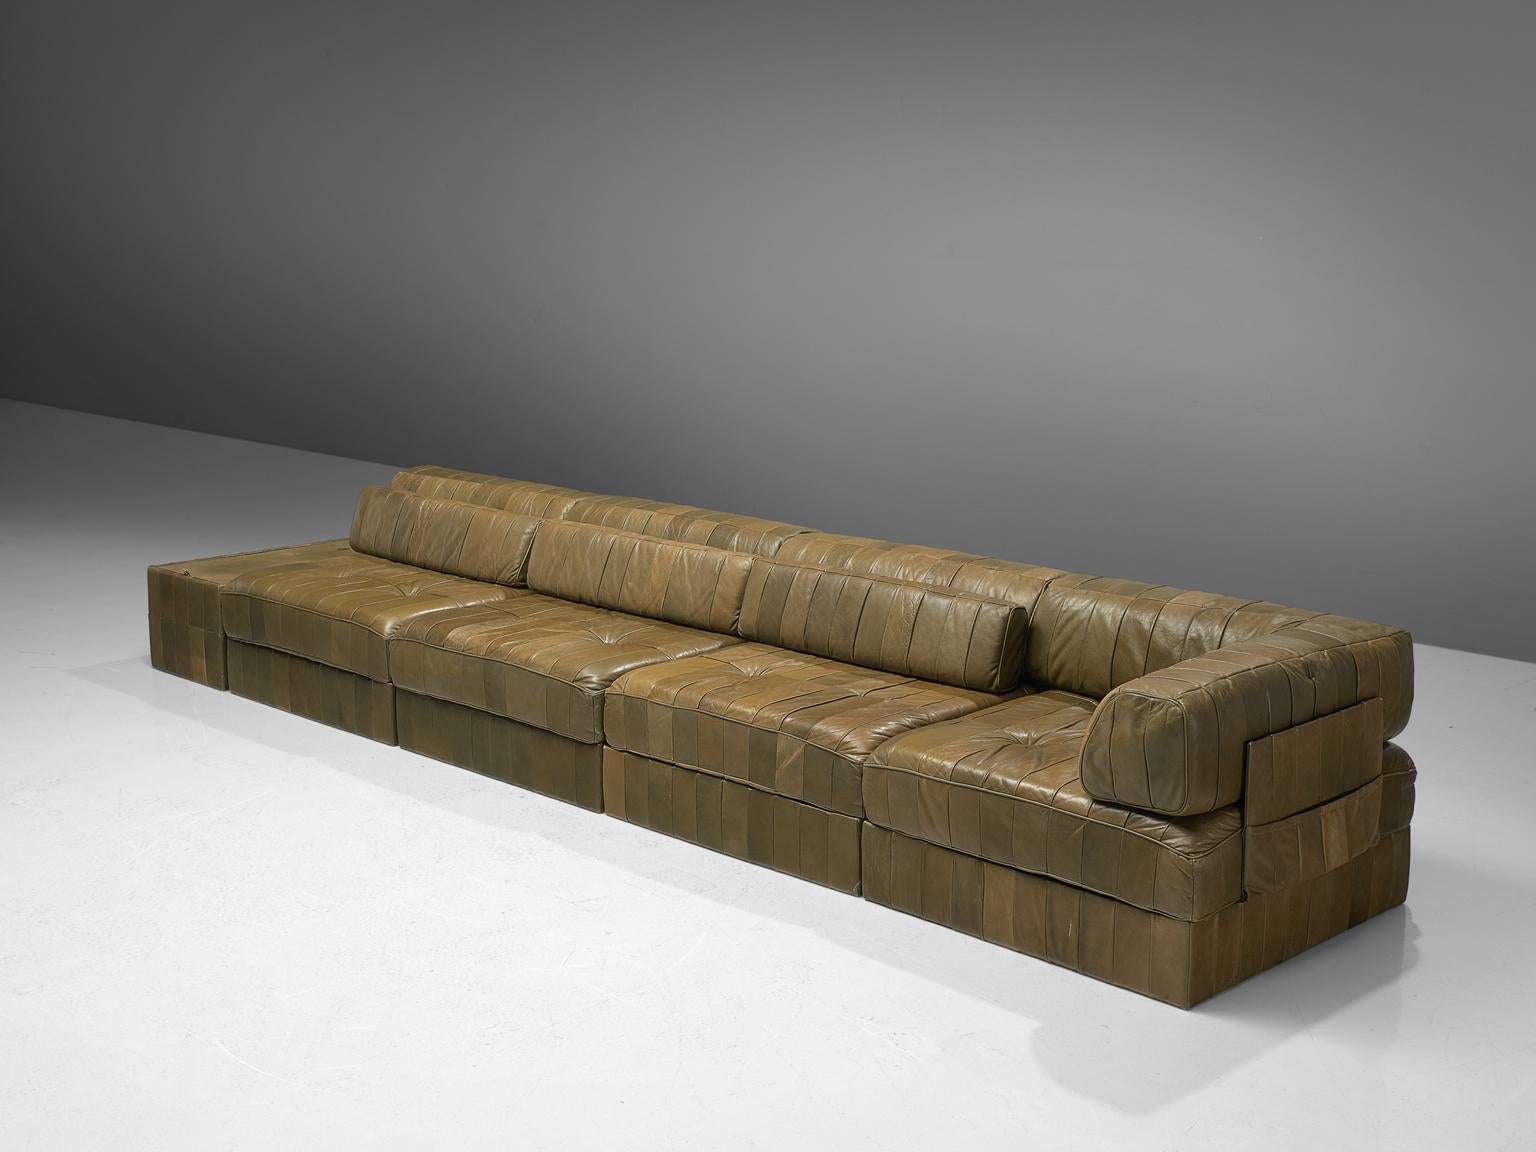 De Sede, sofa, DS 88, olive green patinated leather, 1970s. 

This comfortable leather sofa is made by quality manufacturer De Sede in Switzerland. Known for its craftsmanship, highest quality leather, and unique aesthetics, De Sede manufactures